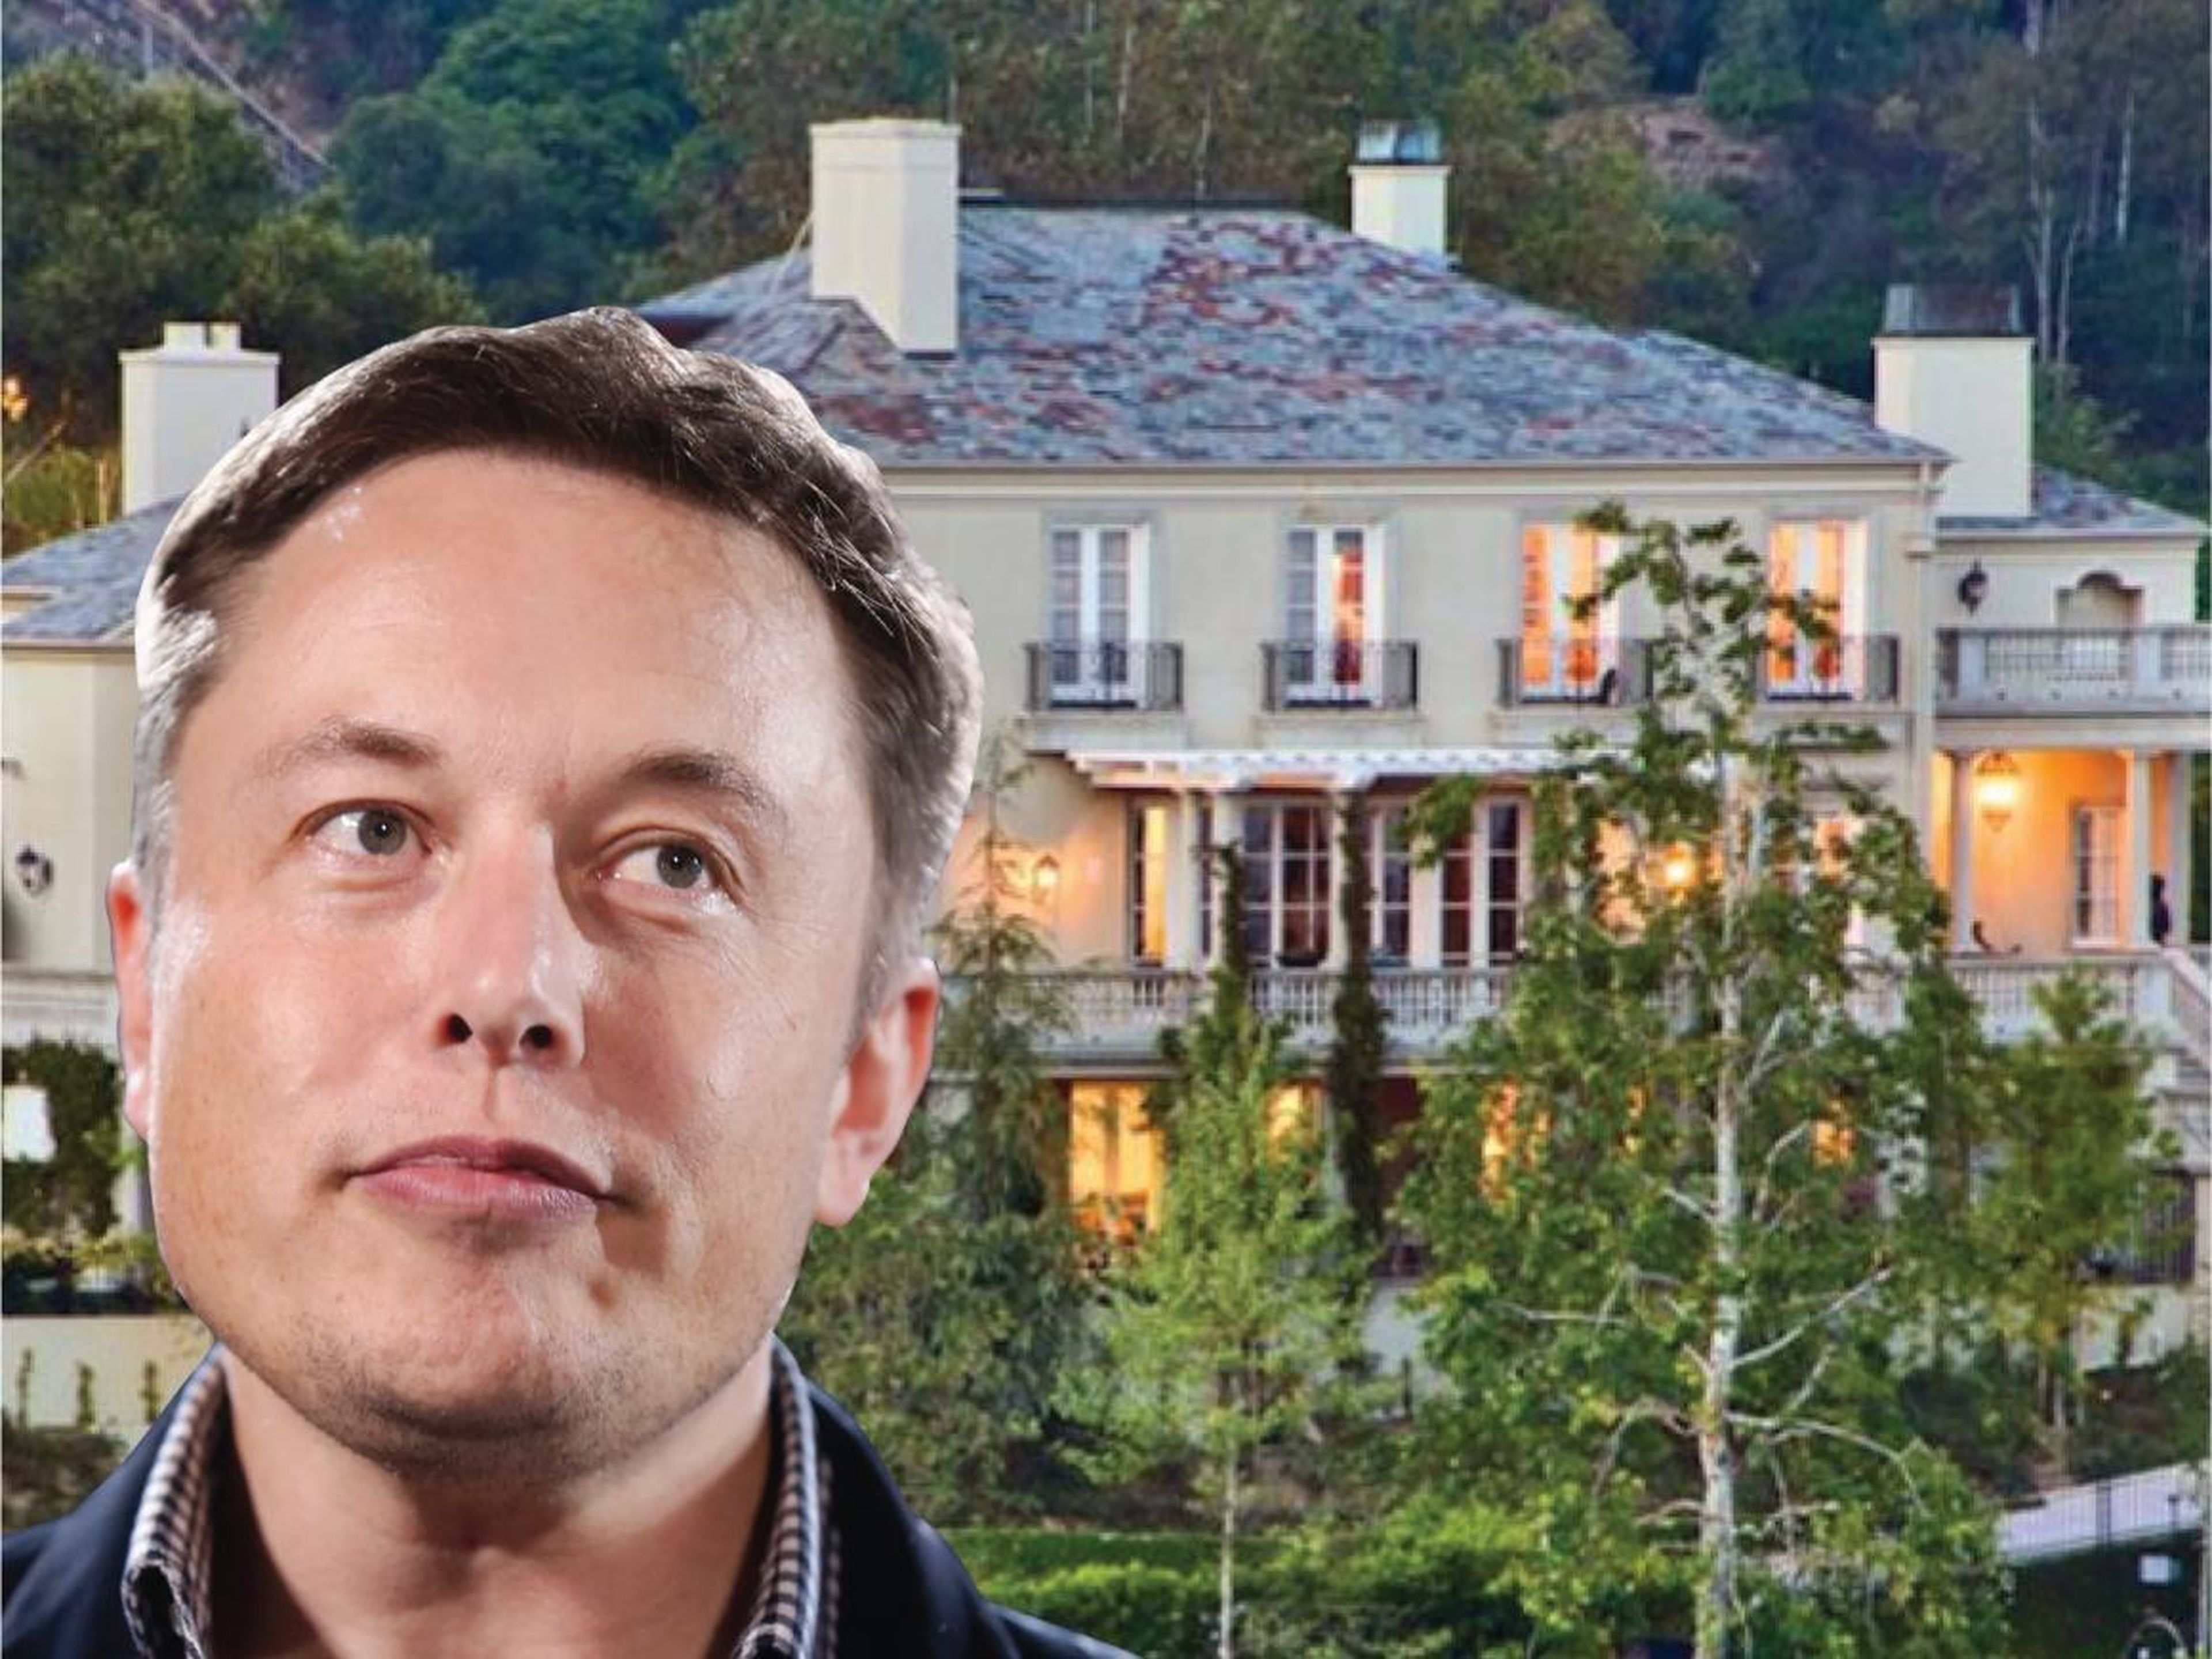 Like many tech billionaires, Musk has also indulged in properties to build an impressive real estate portfolio.